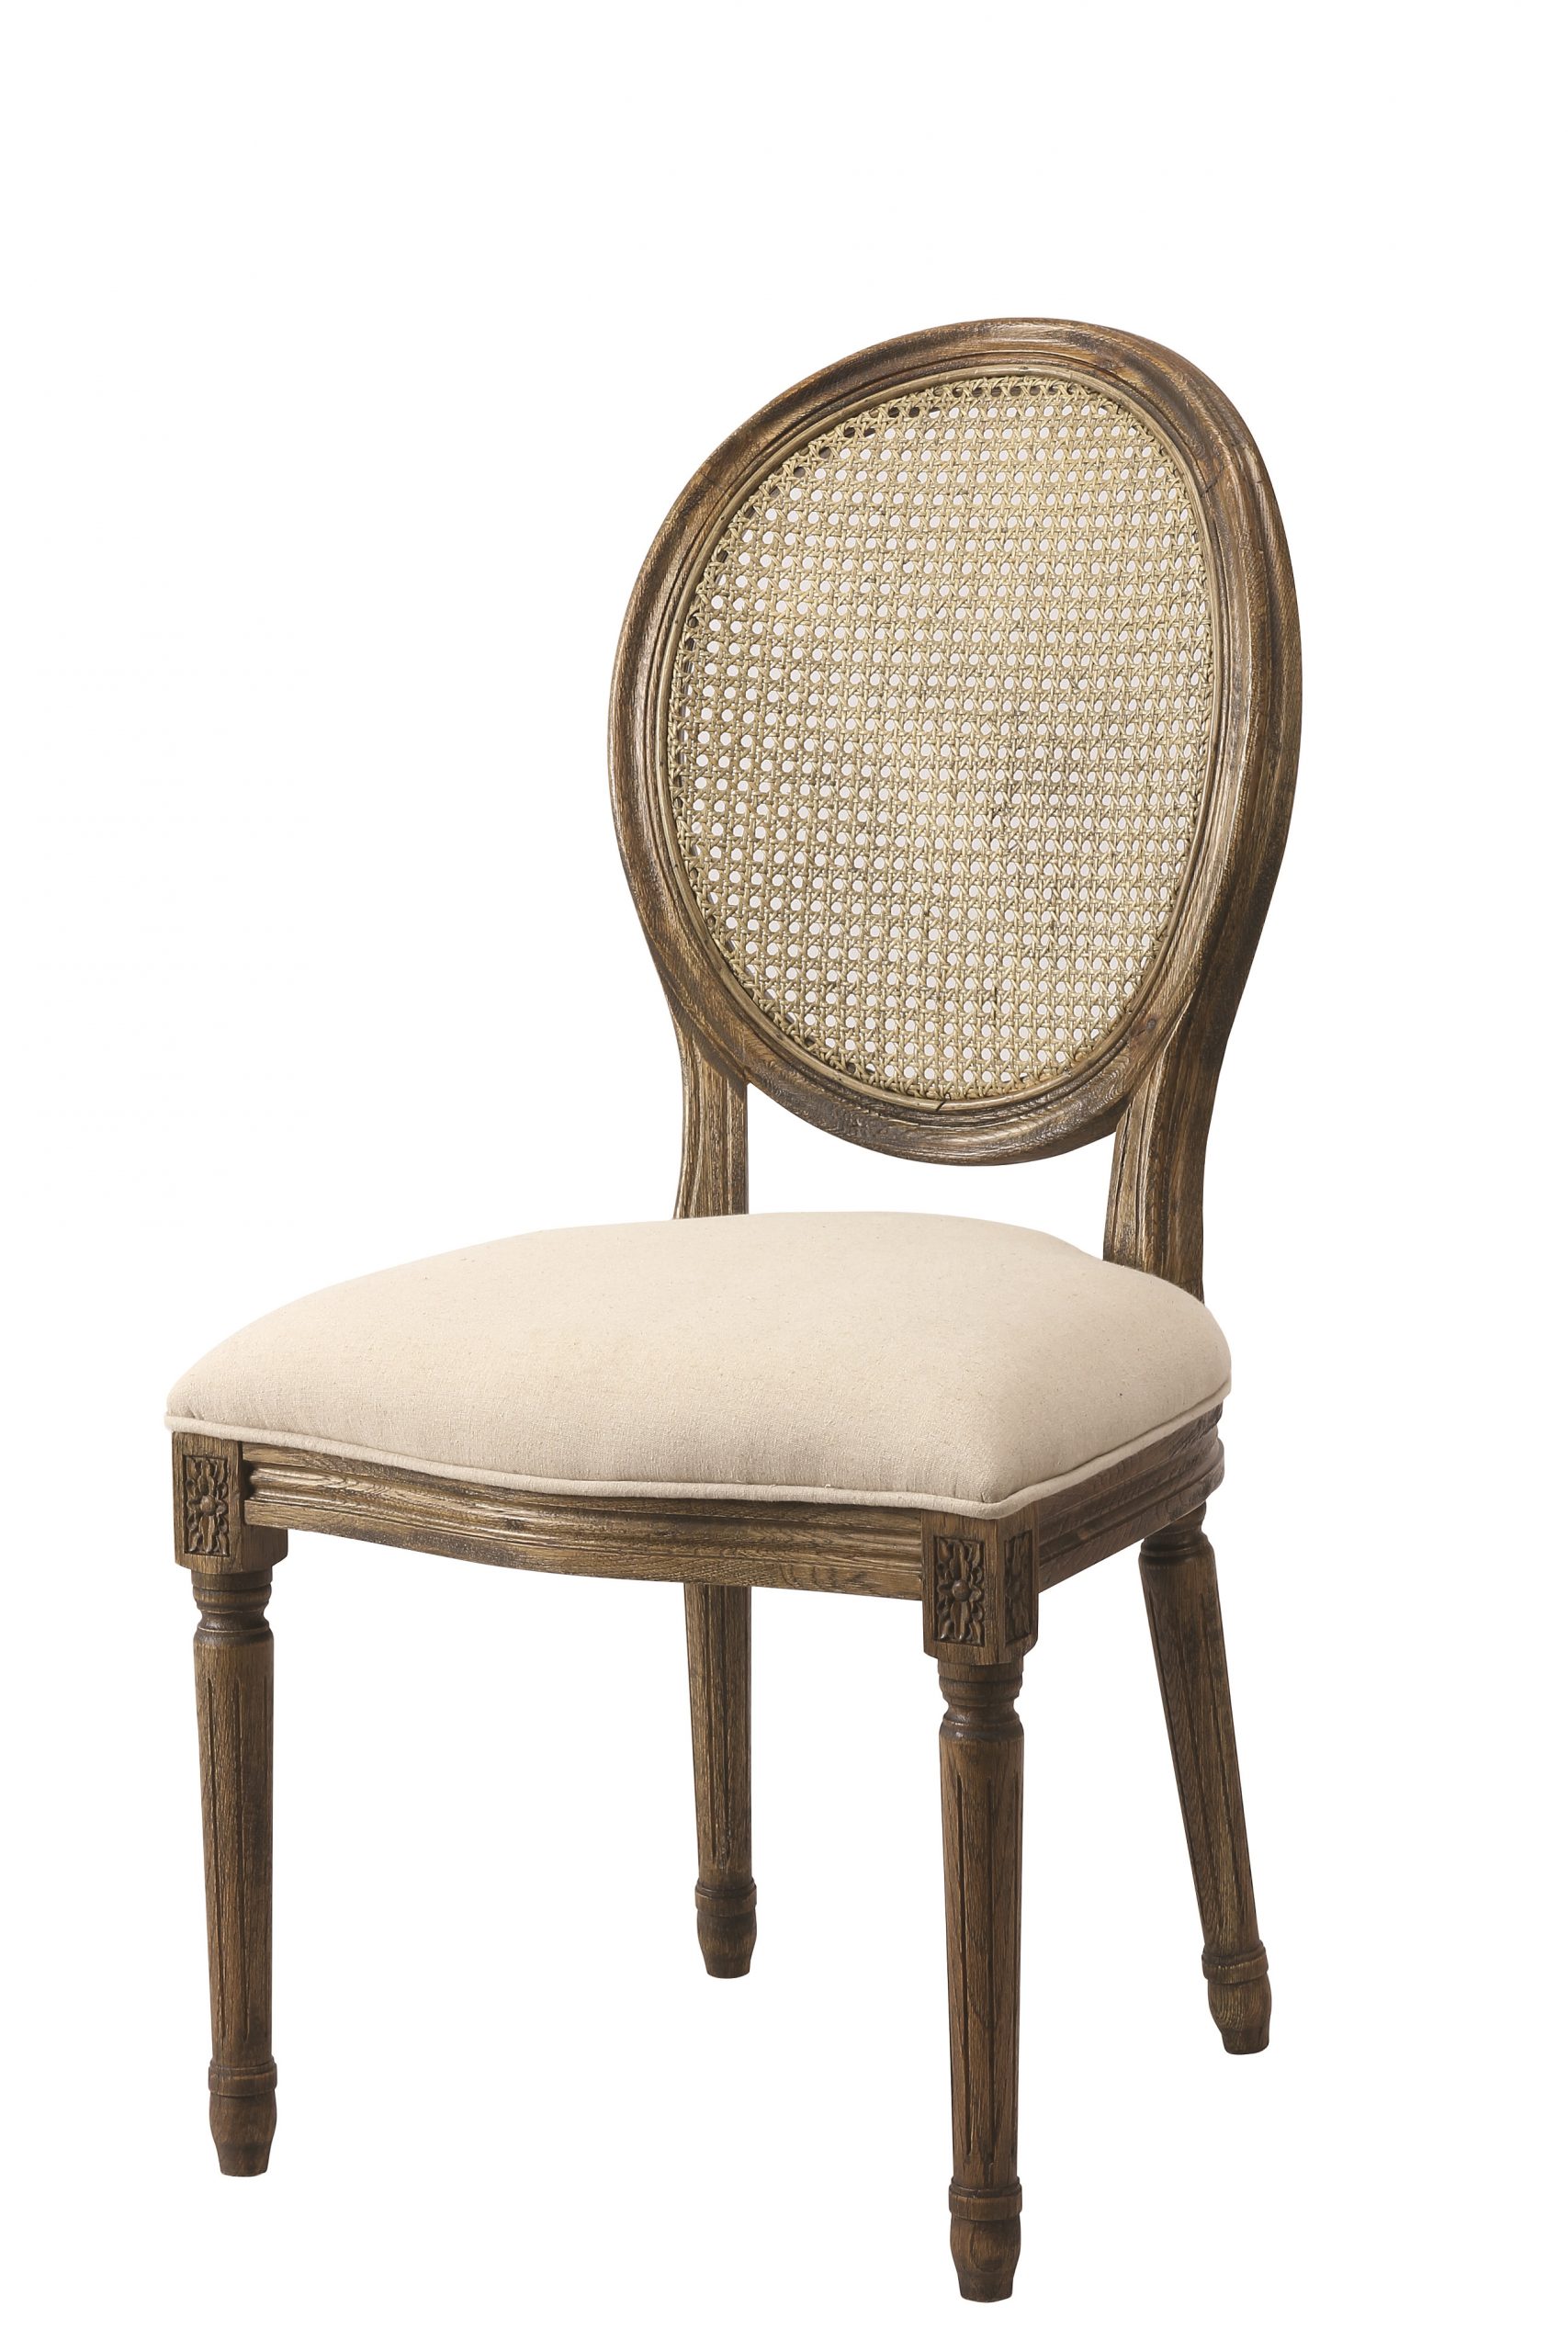 King Louis Cane Back Chair Rentals - A to Z Event Rentals, LLC.